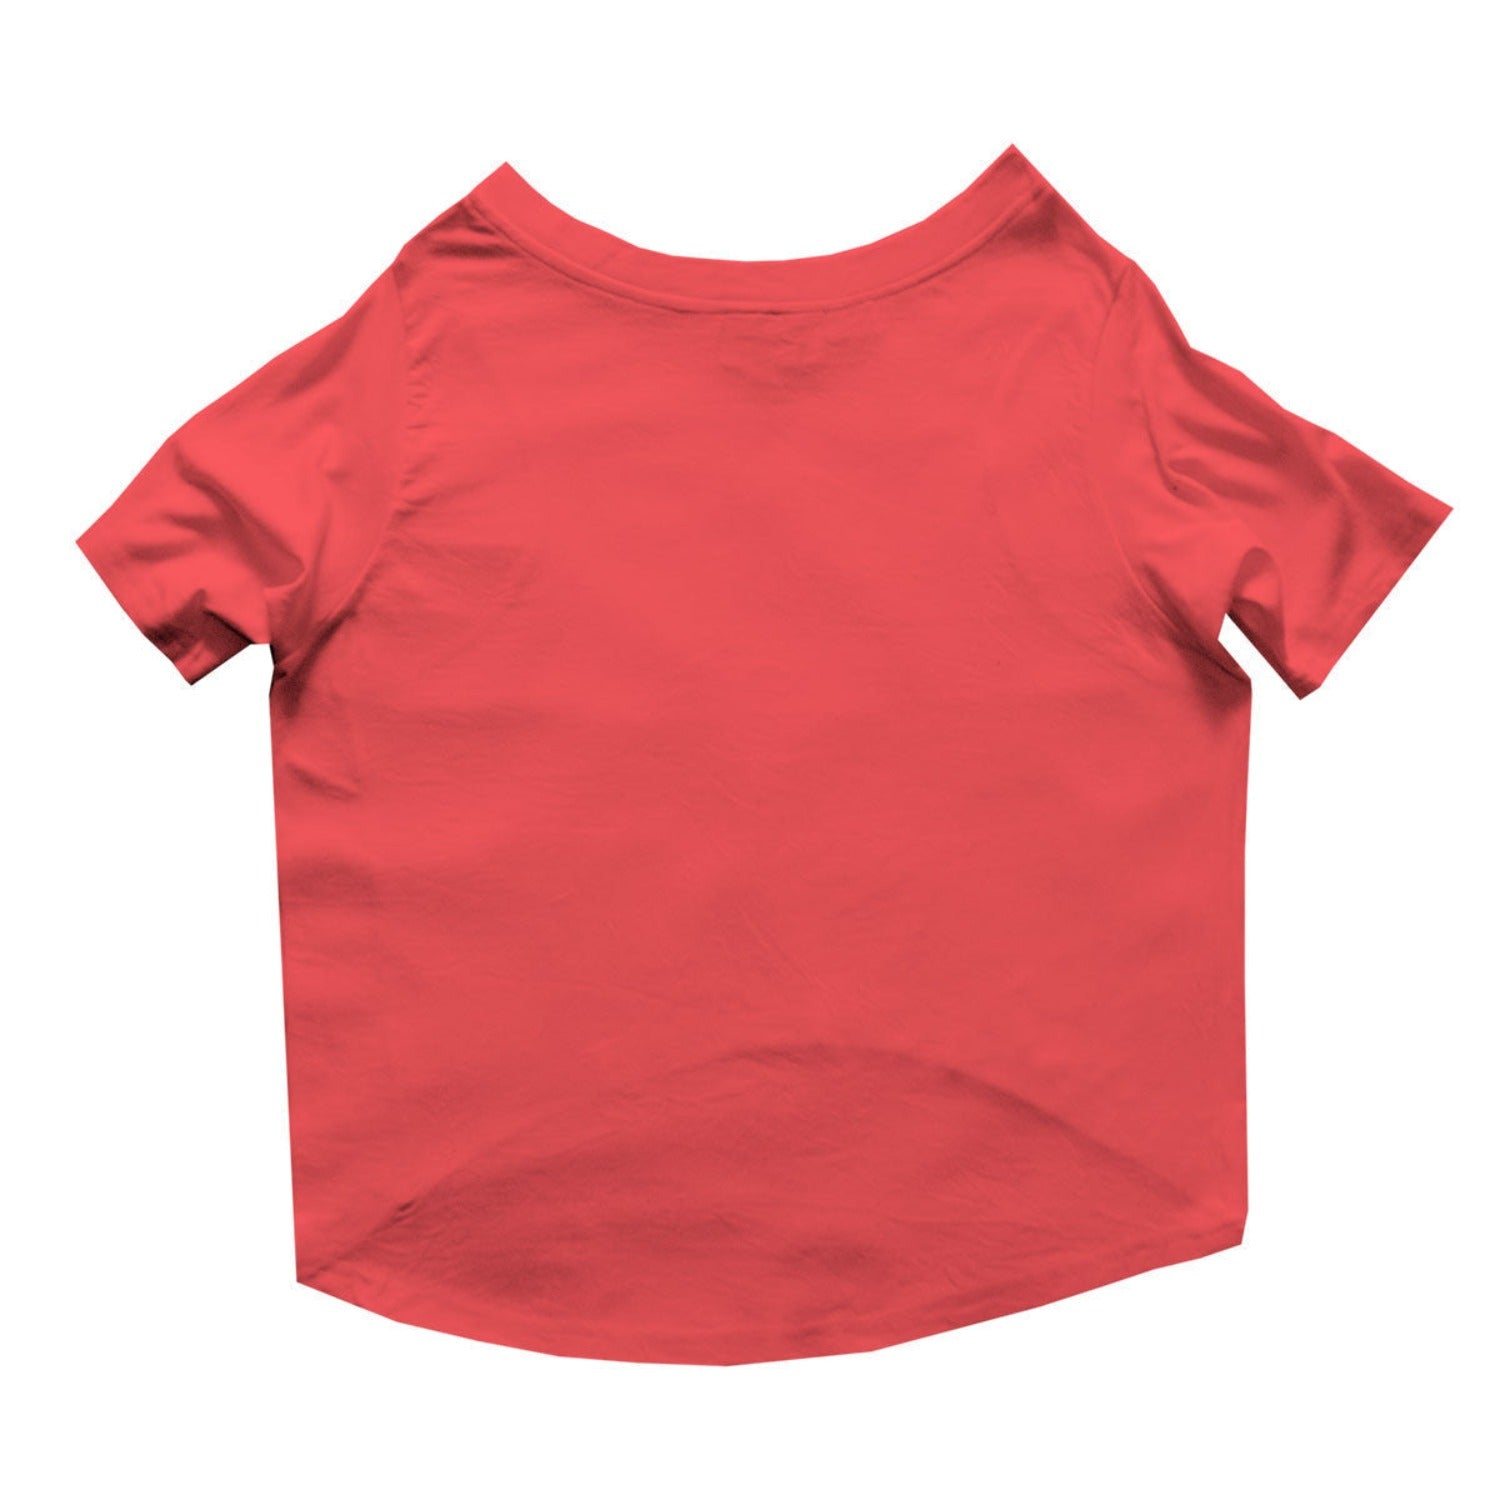 Ruse / Poppy Red Ruse Basic Crew Neck "Favourite Brother" Printed Half Sleeves Dog Tee21